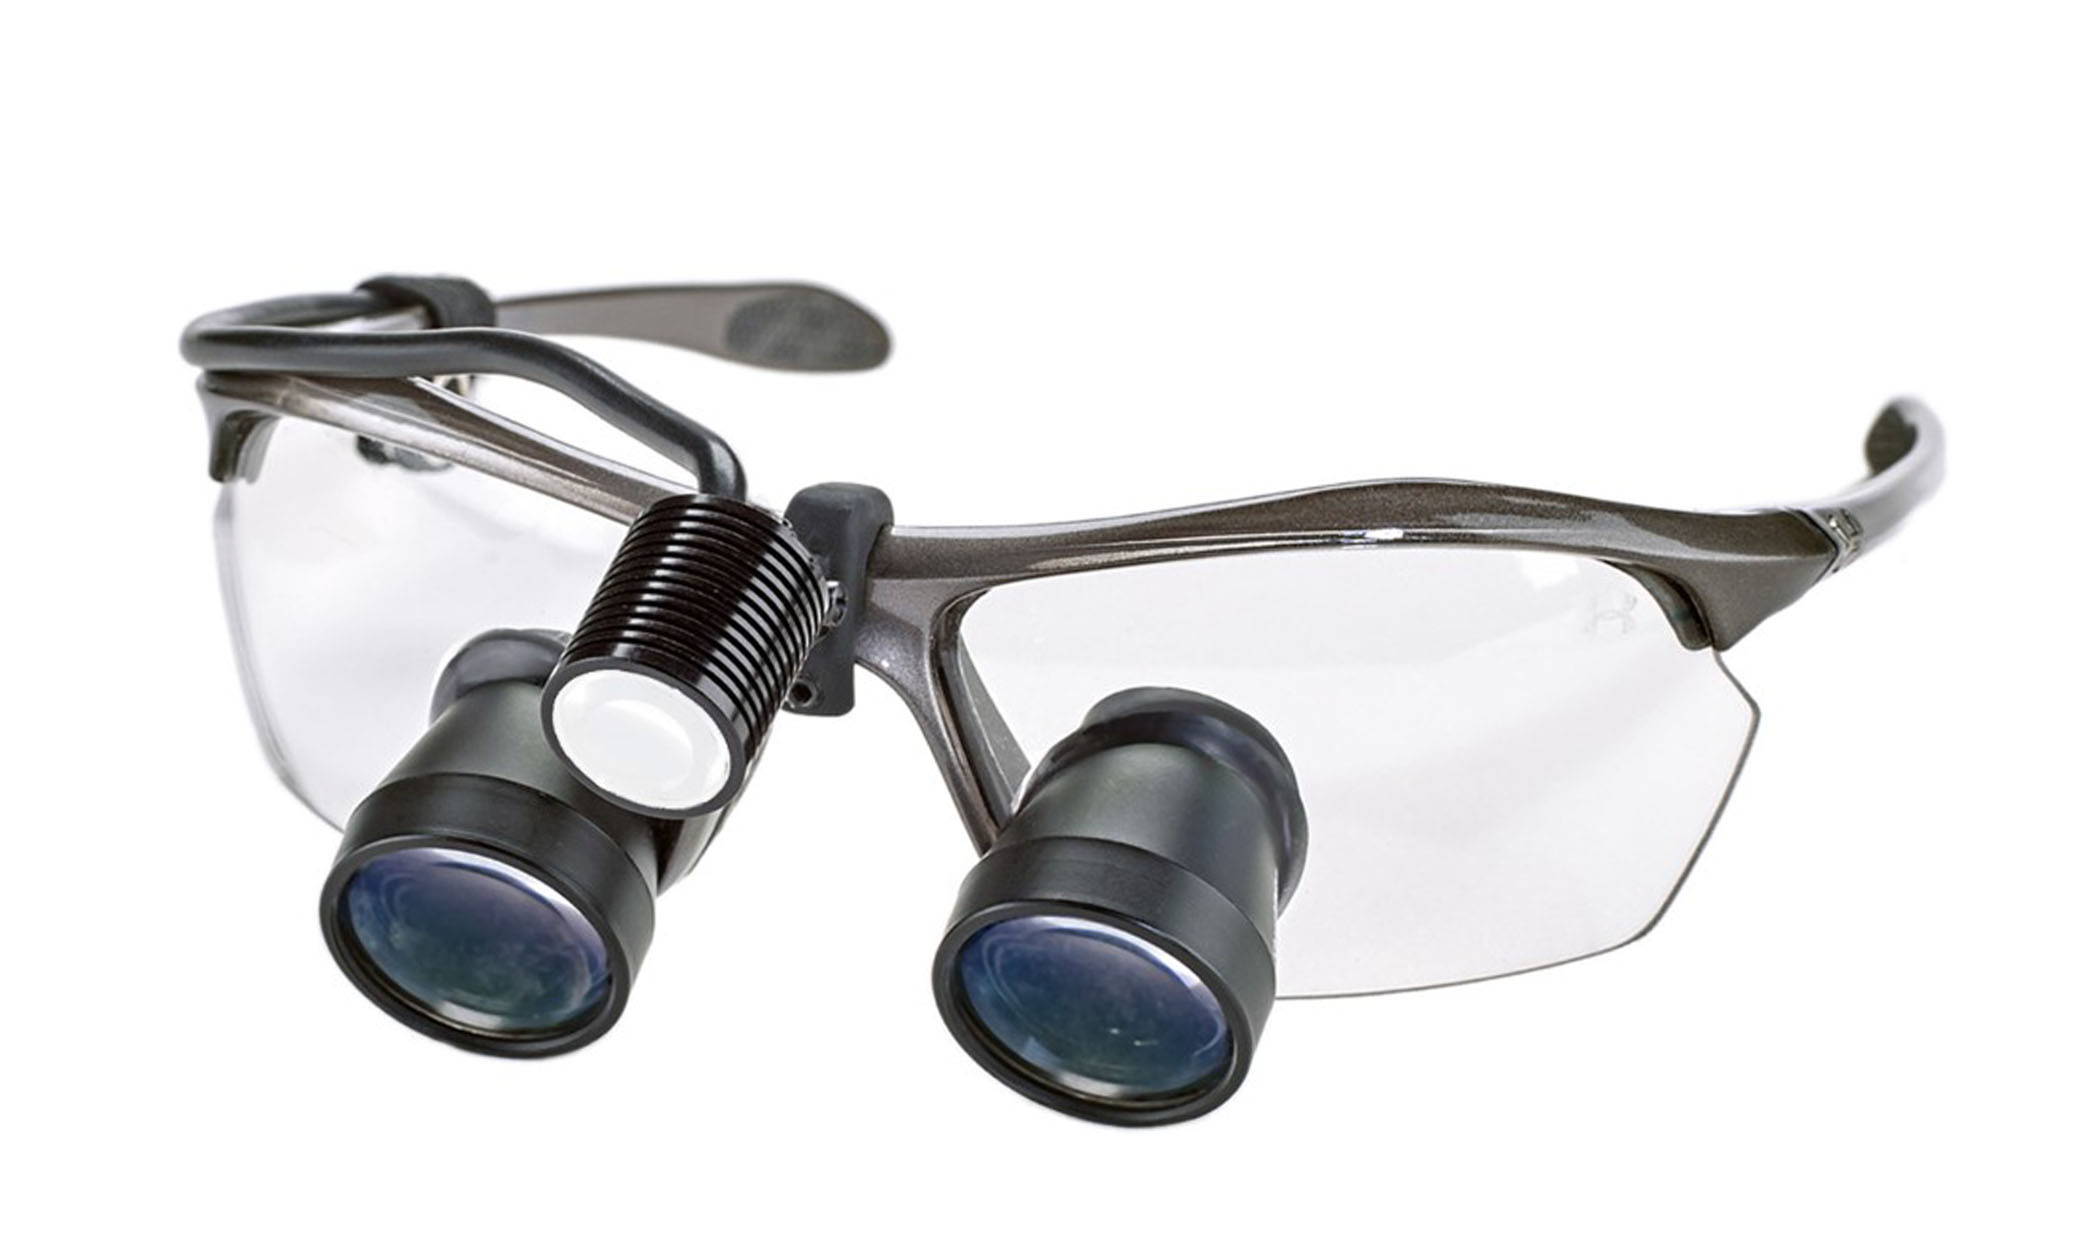 Hot Deals on Surgical Loupes & Headlights